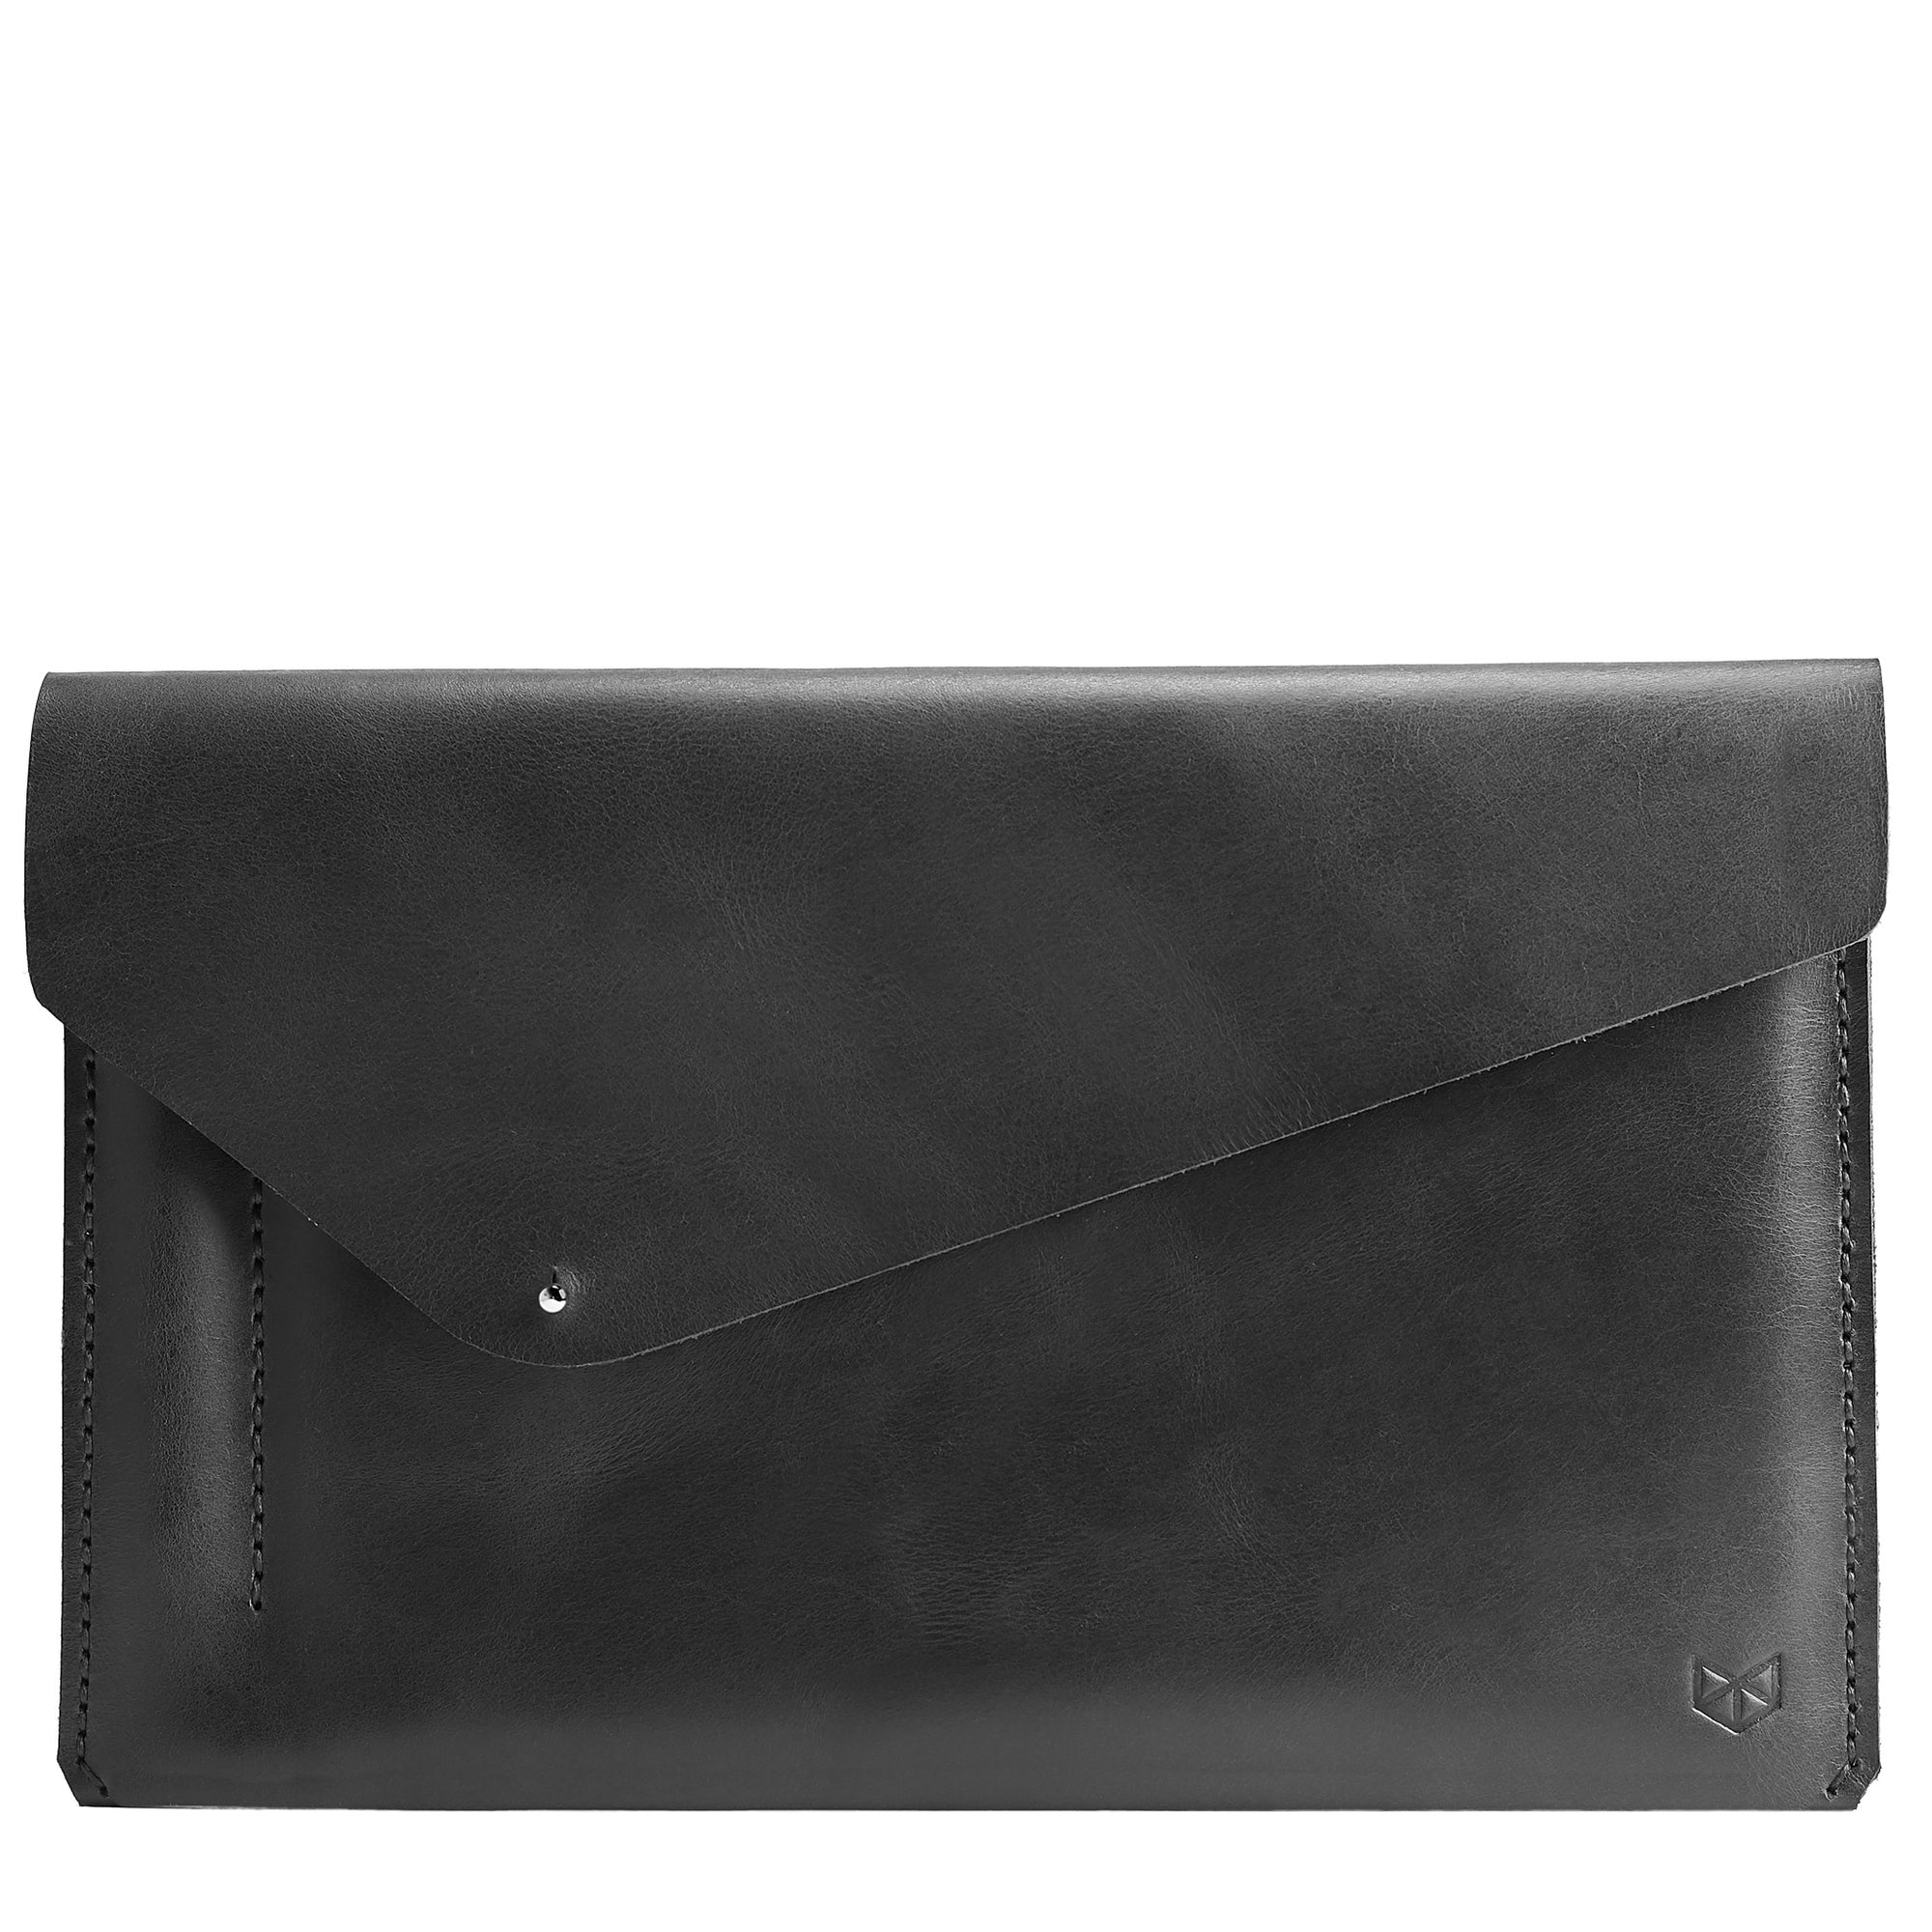 From view. iPad Sleeve. iPad Leather Case Black With Apple Pencil Holder by Capra Leather